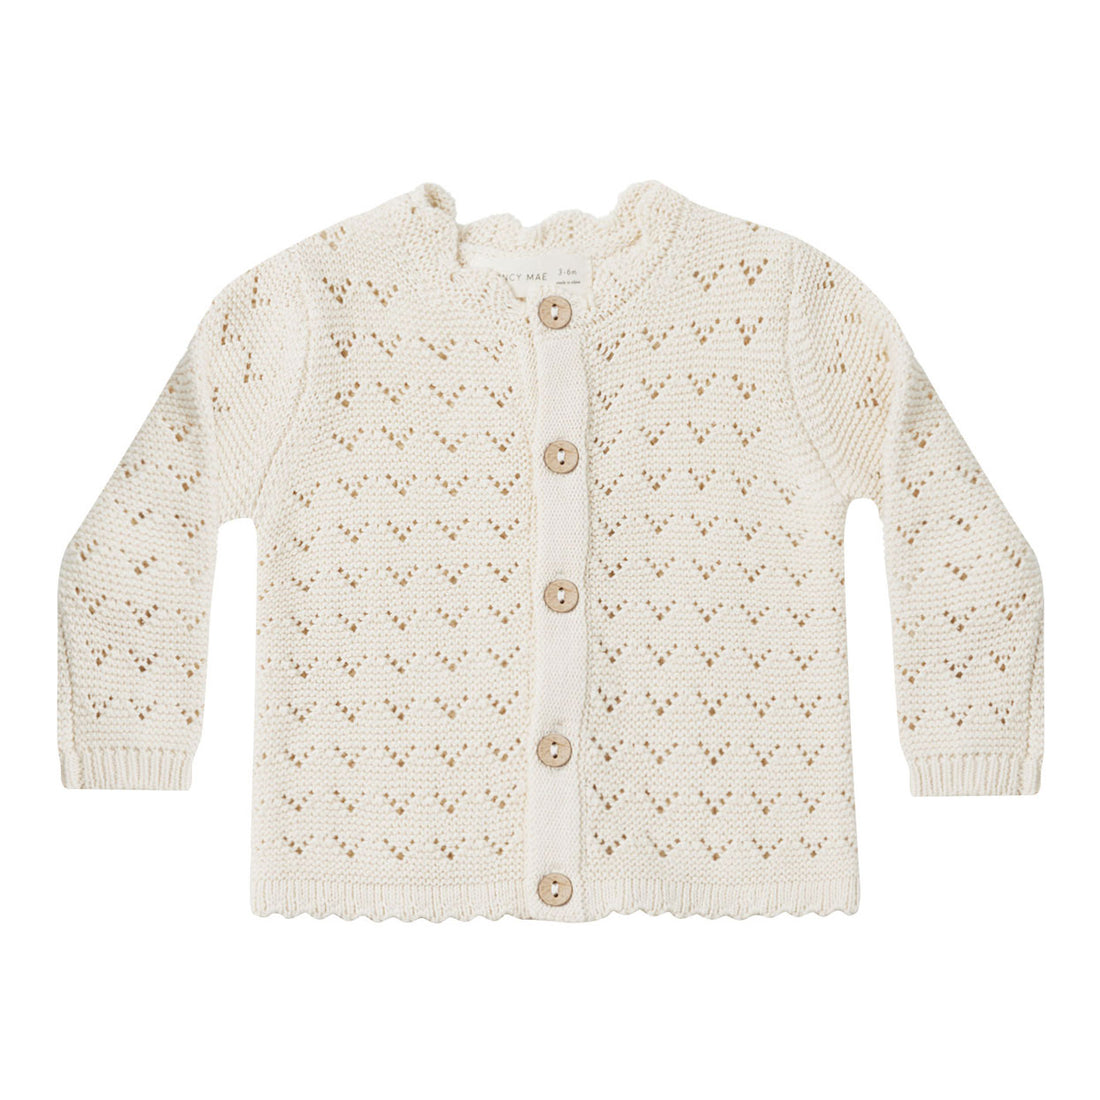 Quincy Mae Natural Scalloped Cardigan